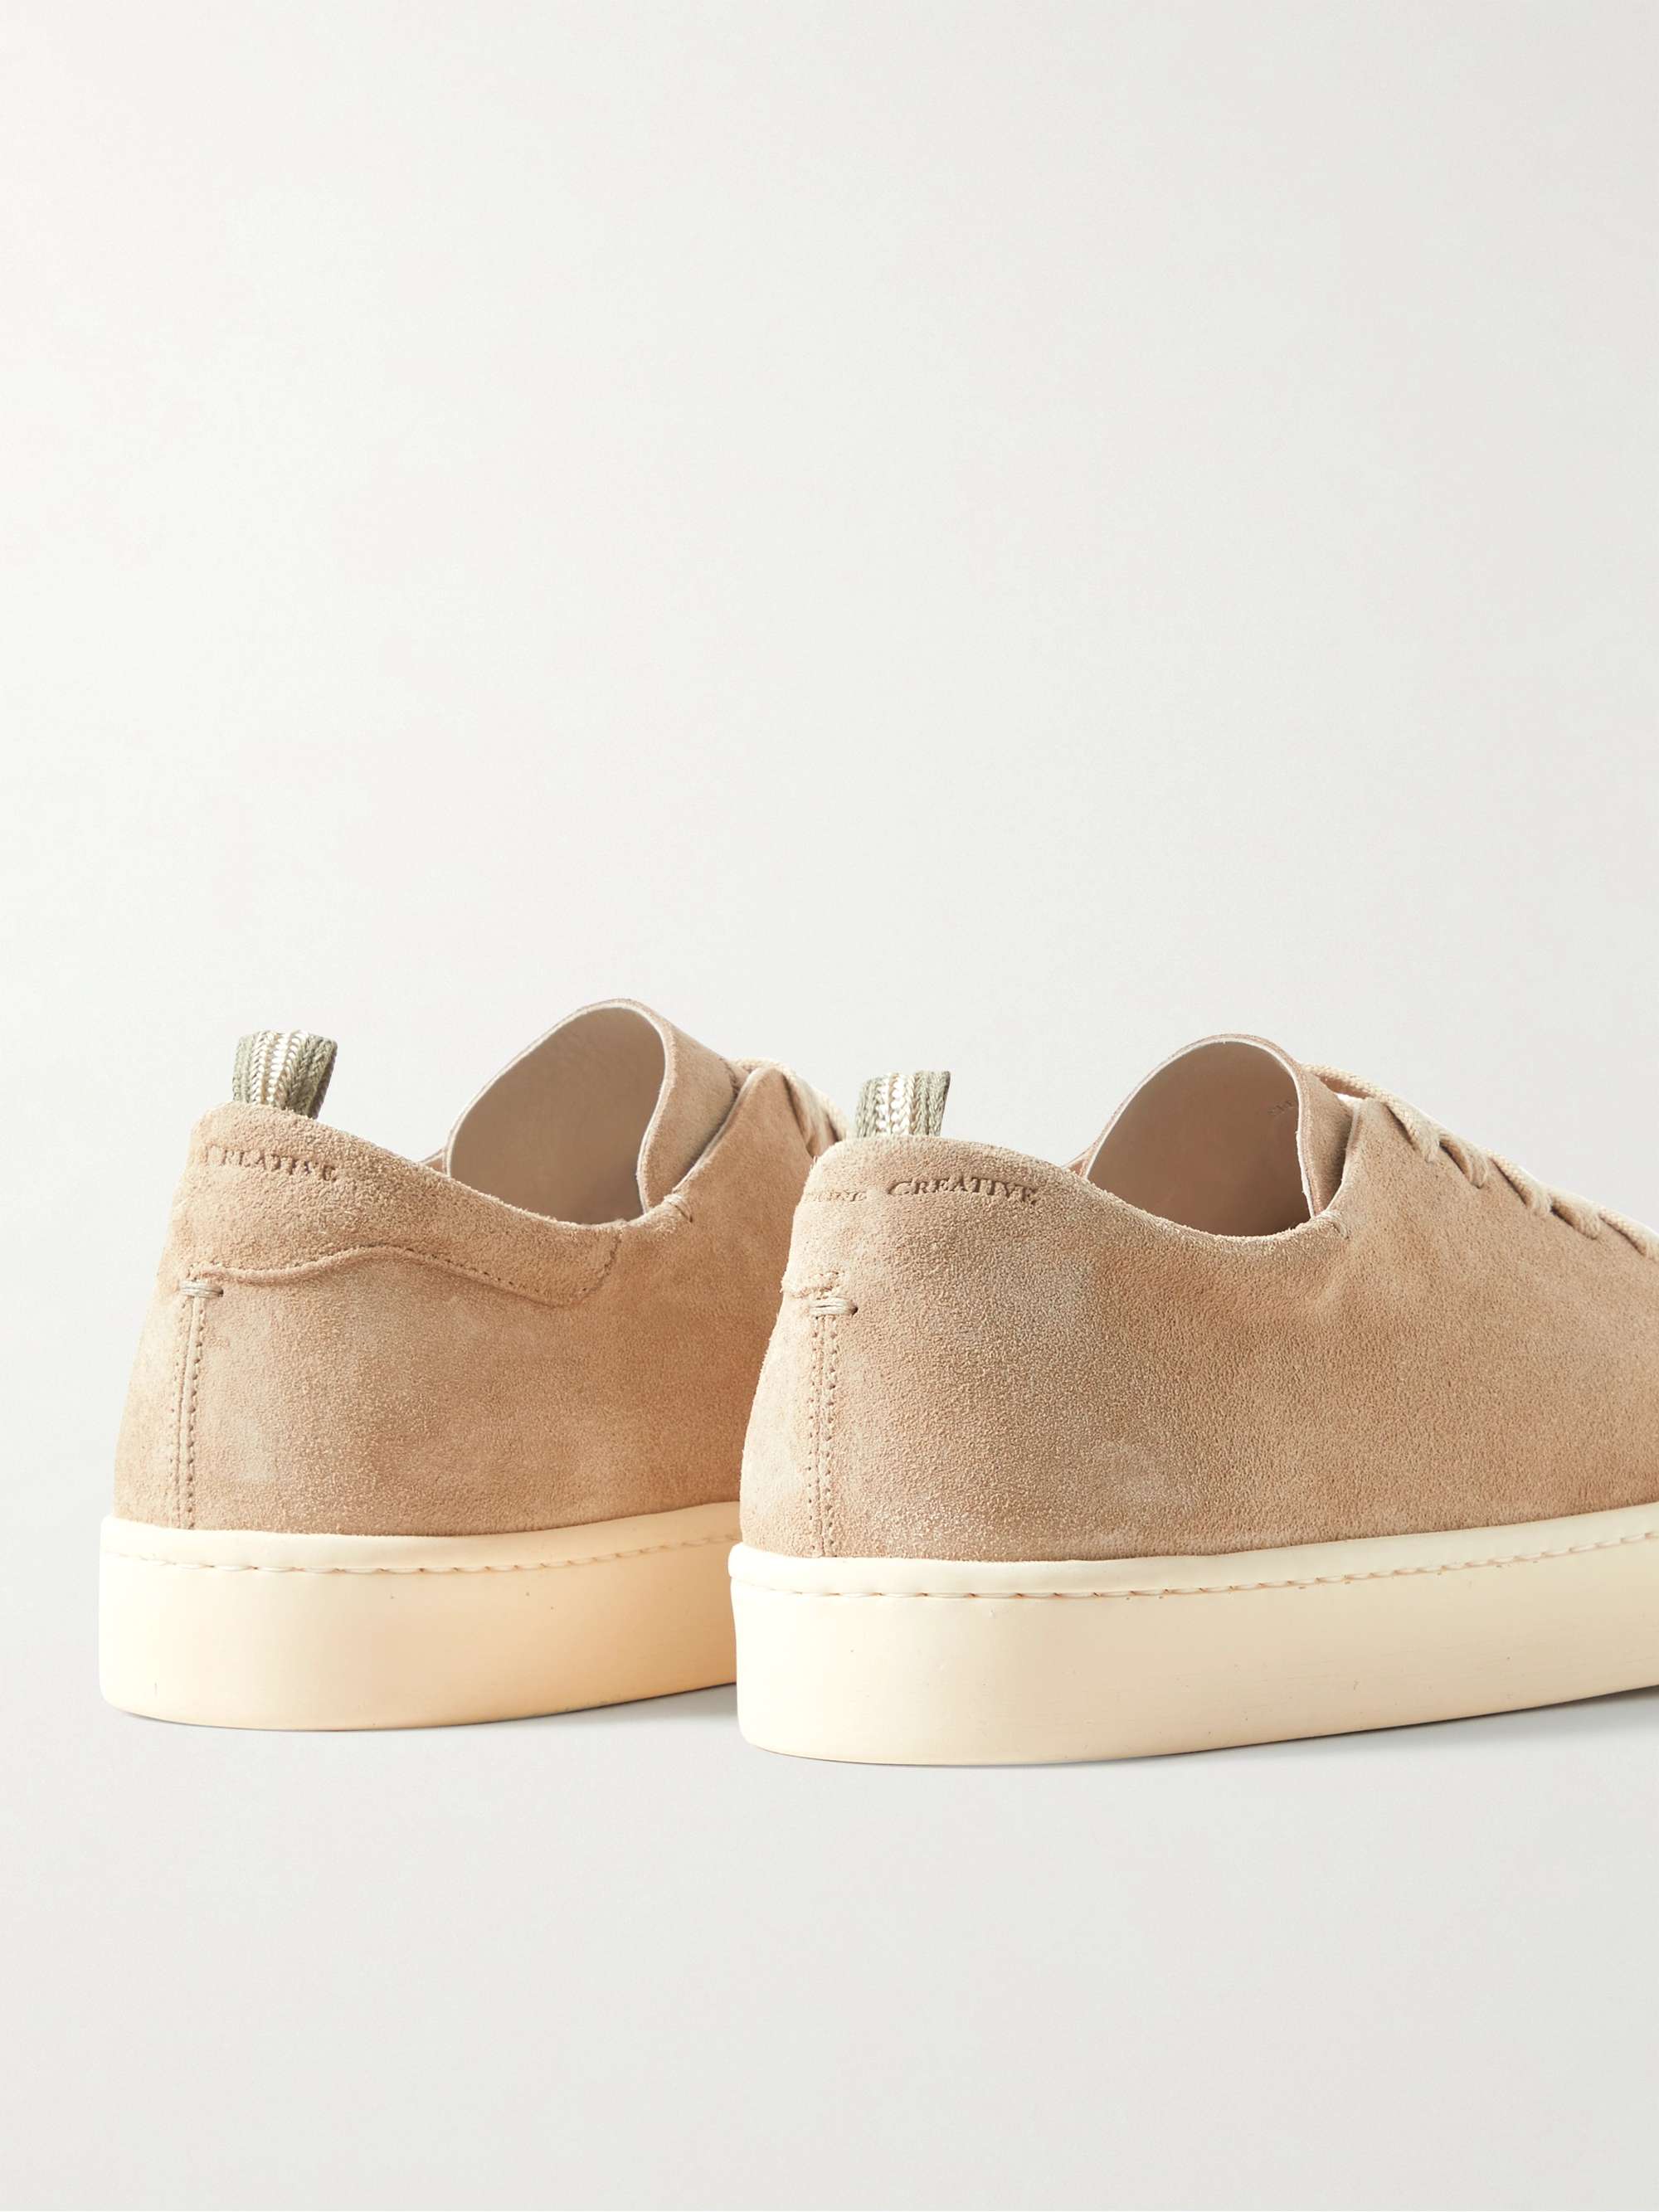 OFFICINE CREATIVE Kreig Leather Sneakers